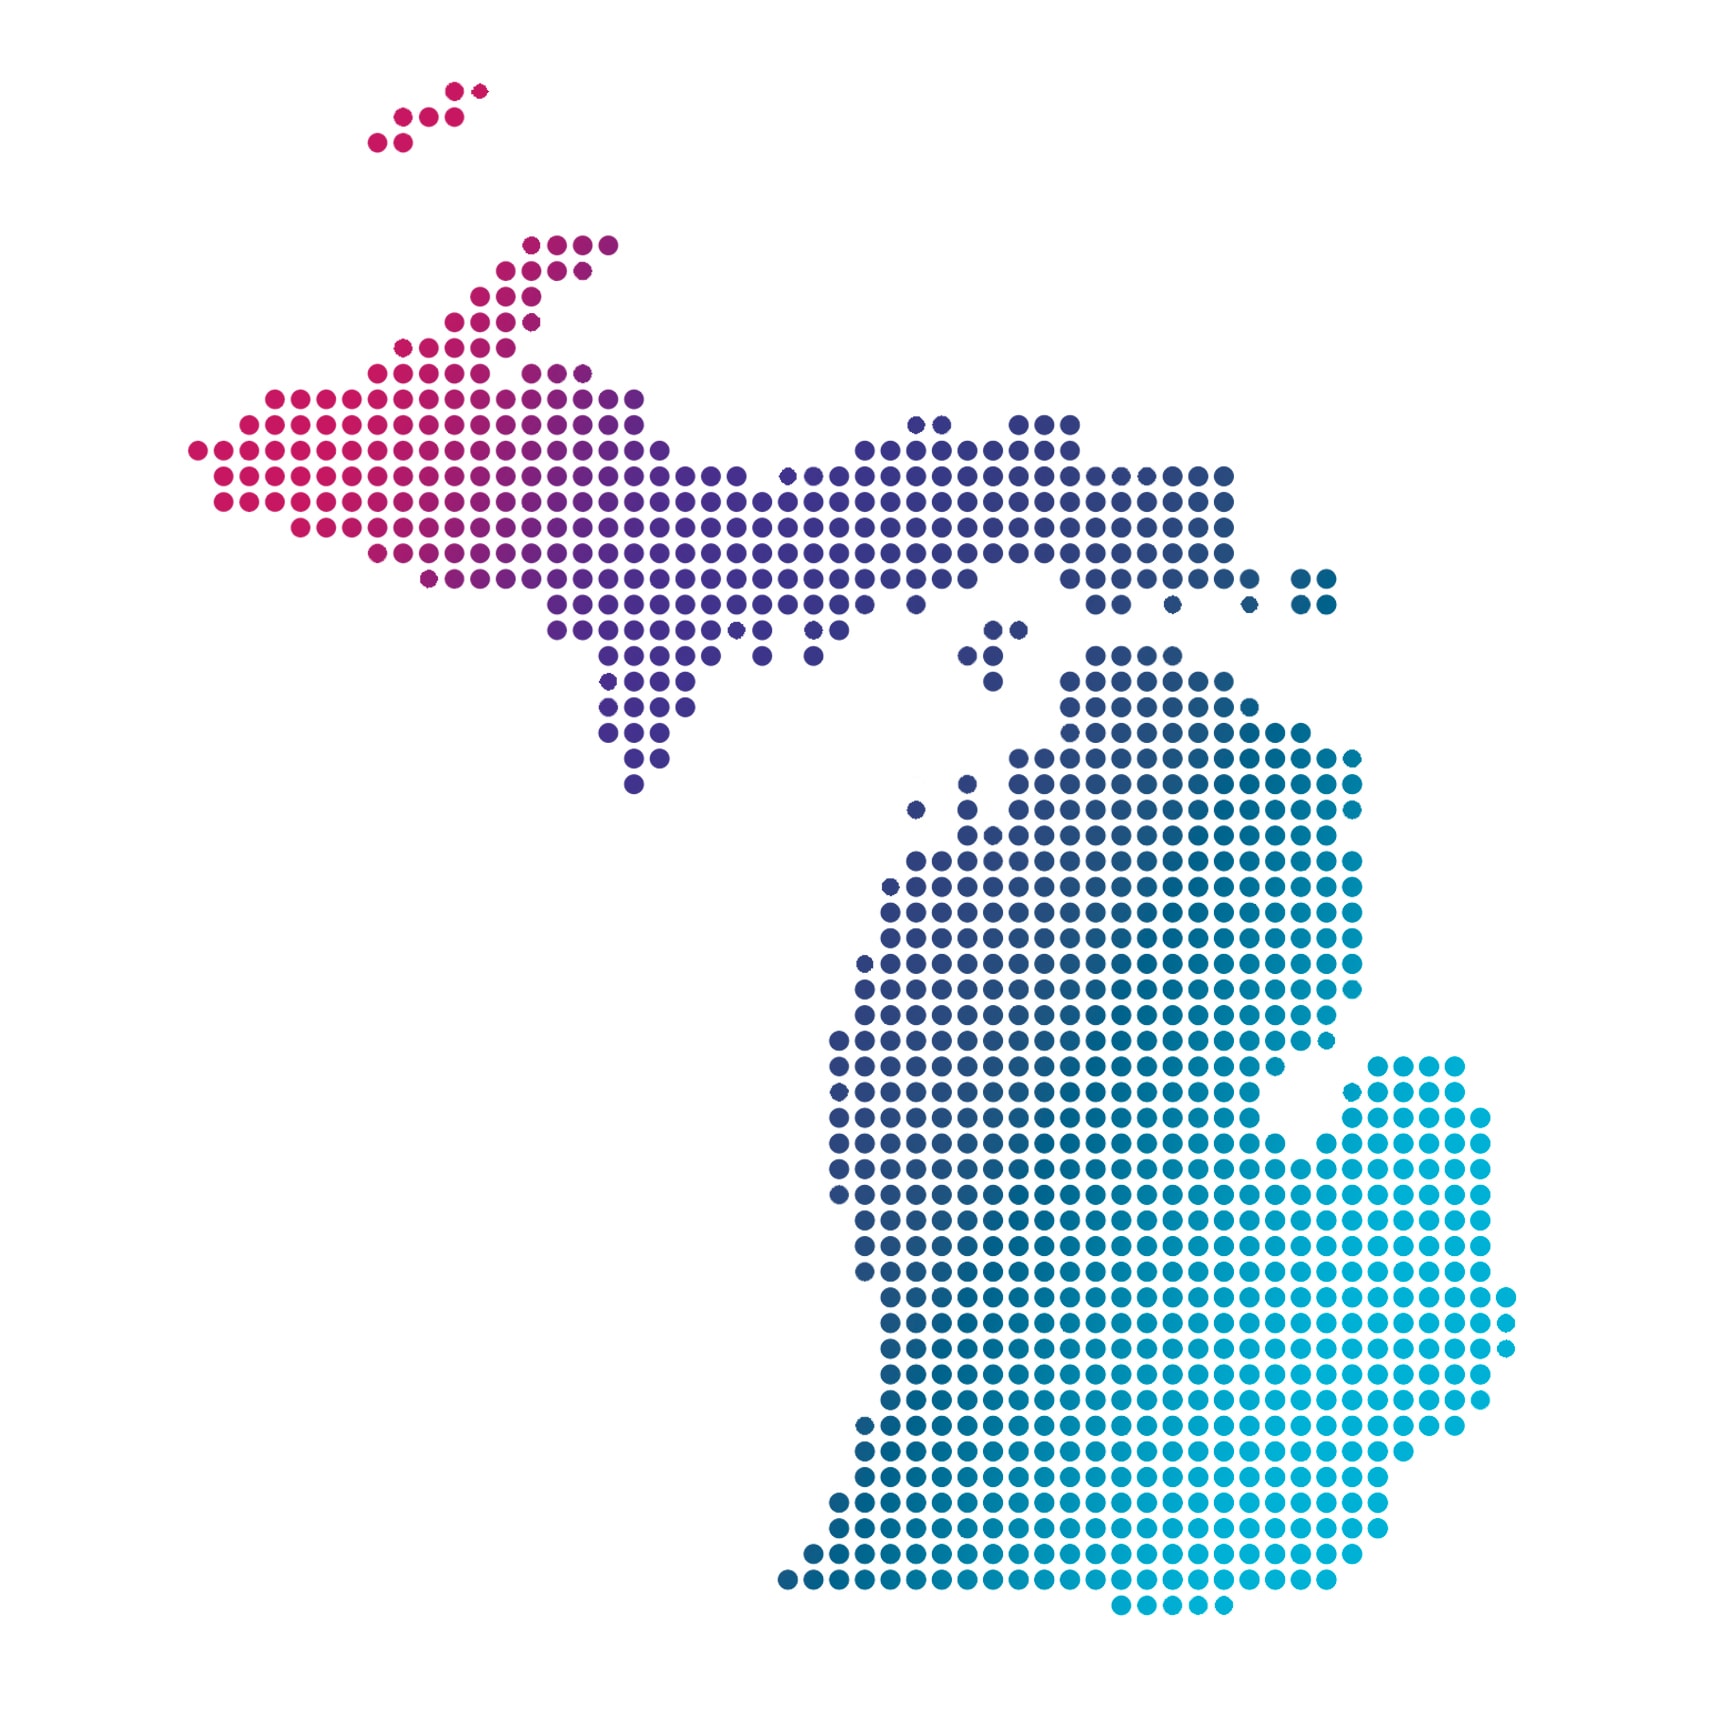 Michigan map of blue dots on white background